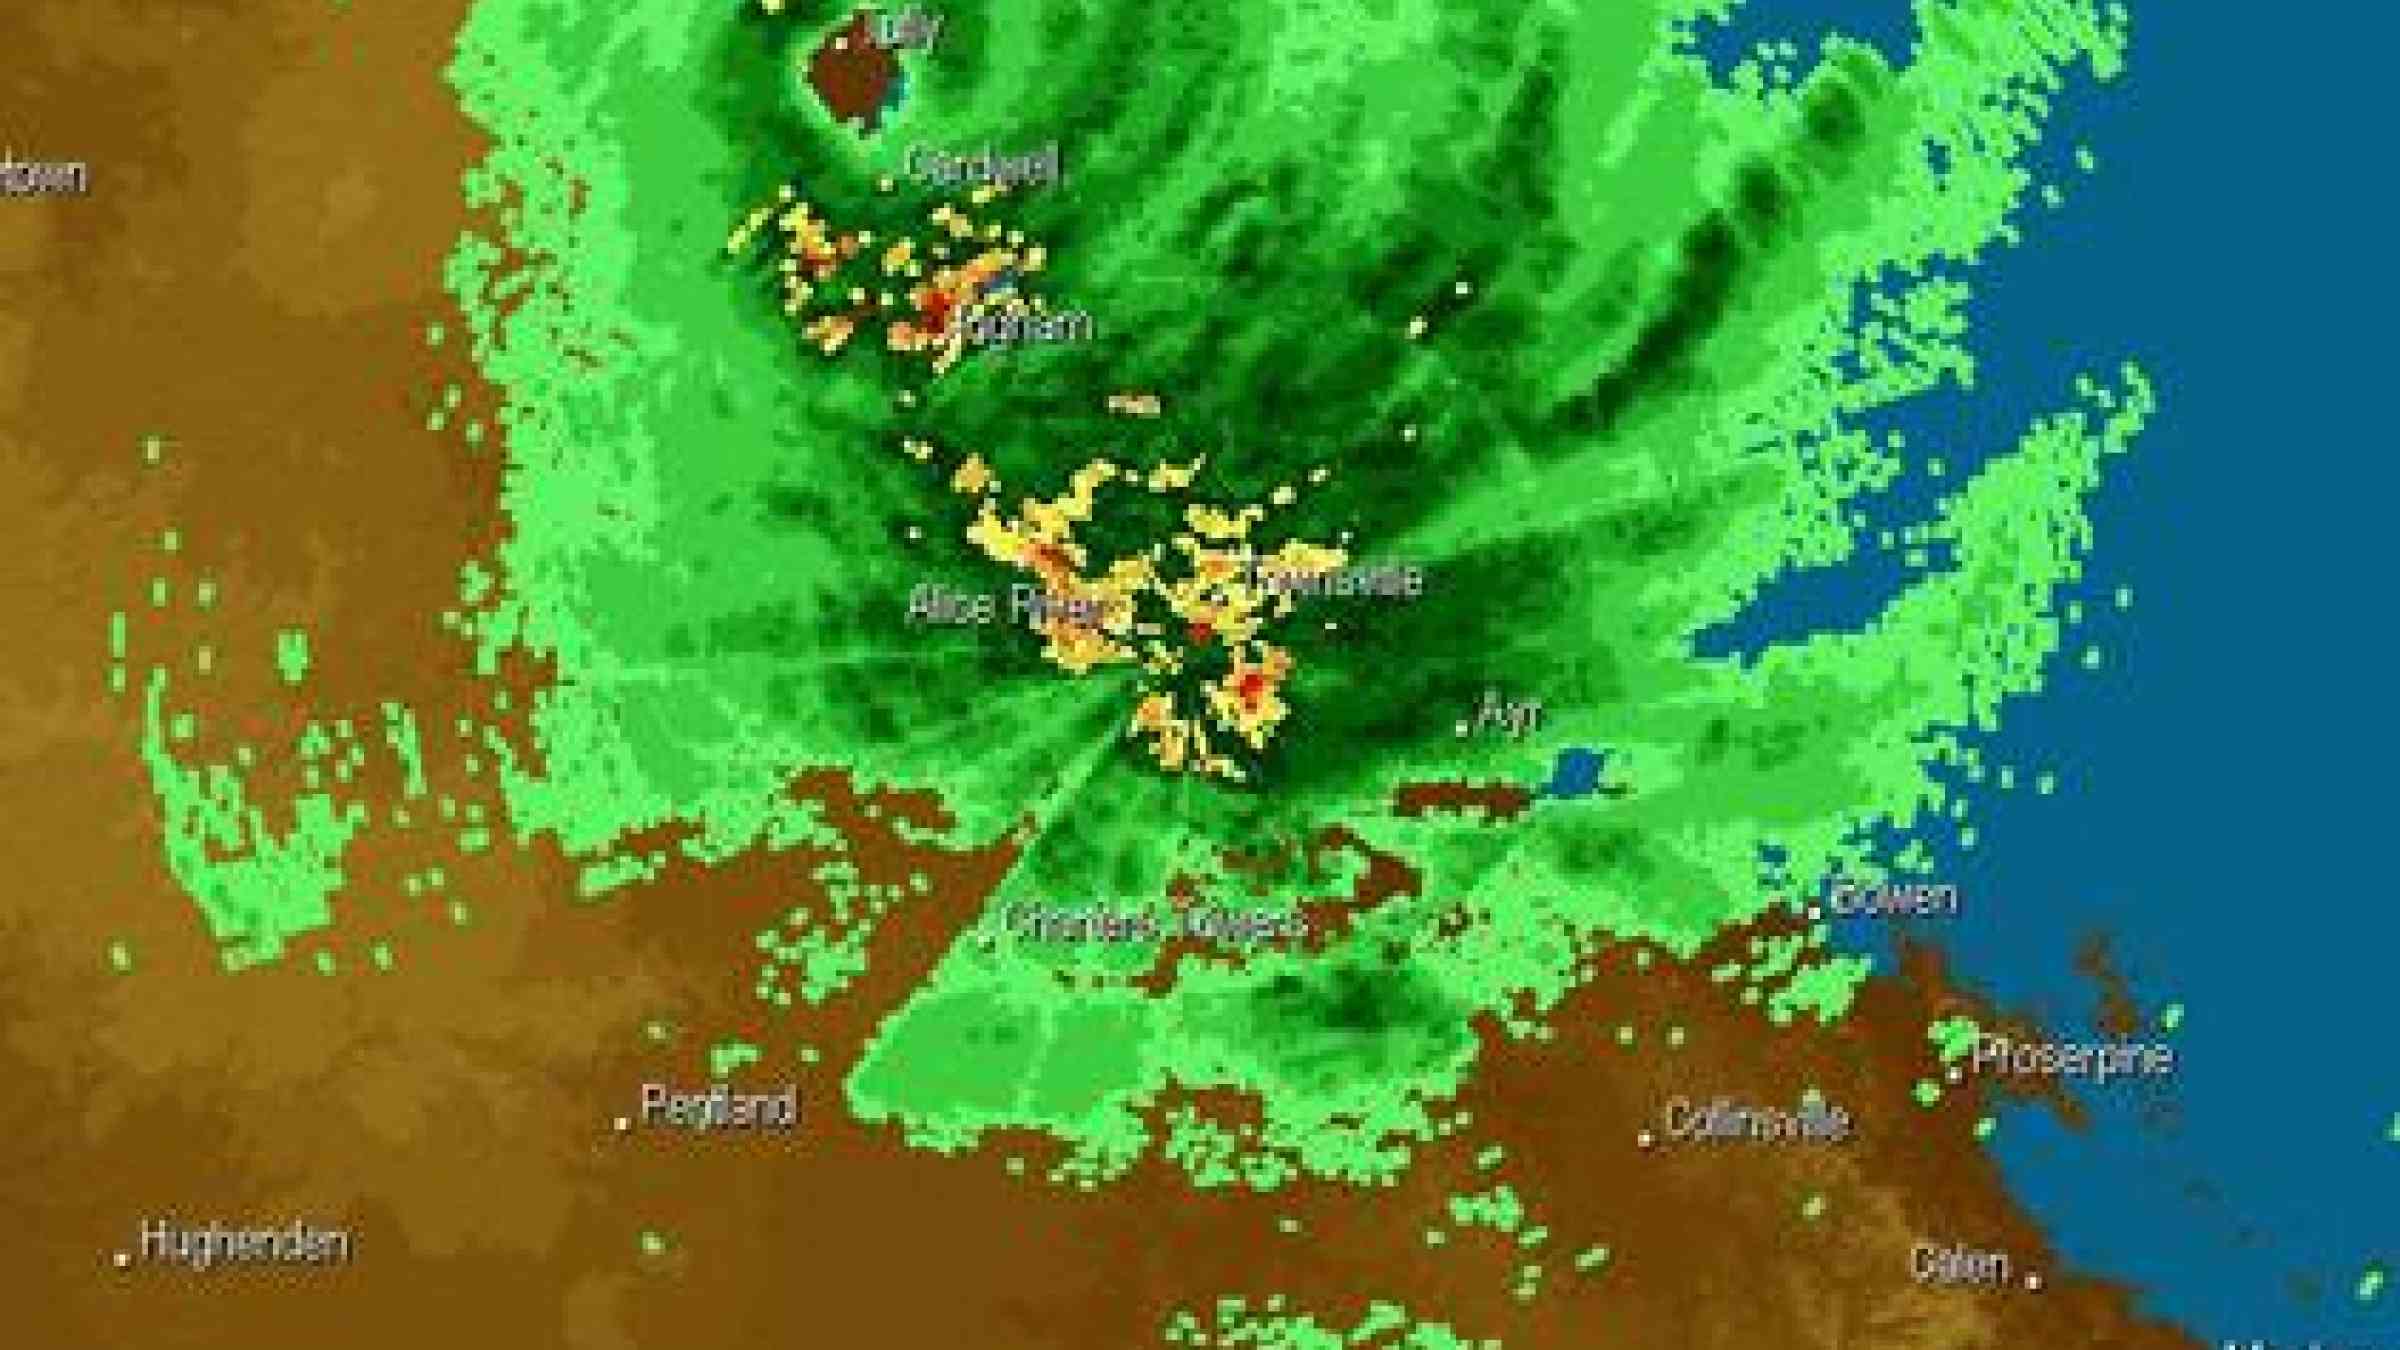 A radar image tracks the Category 5 Cyclone Yasi as it makes landfall in northern Queensland, Australia, in 2011. Science and technology has greatly improved hazard mapping.